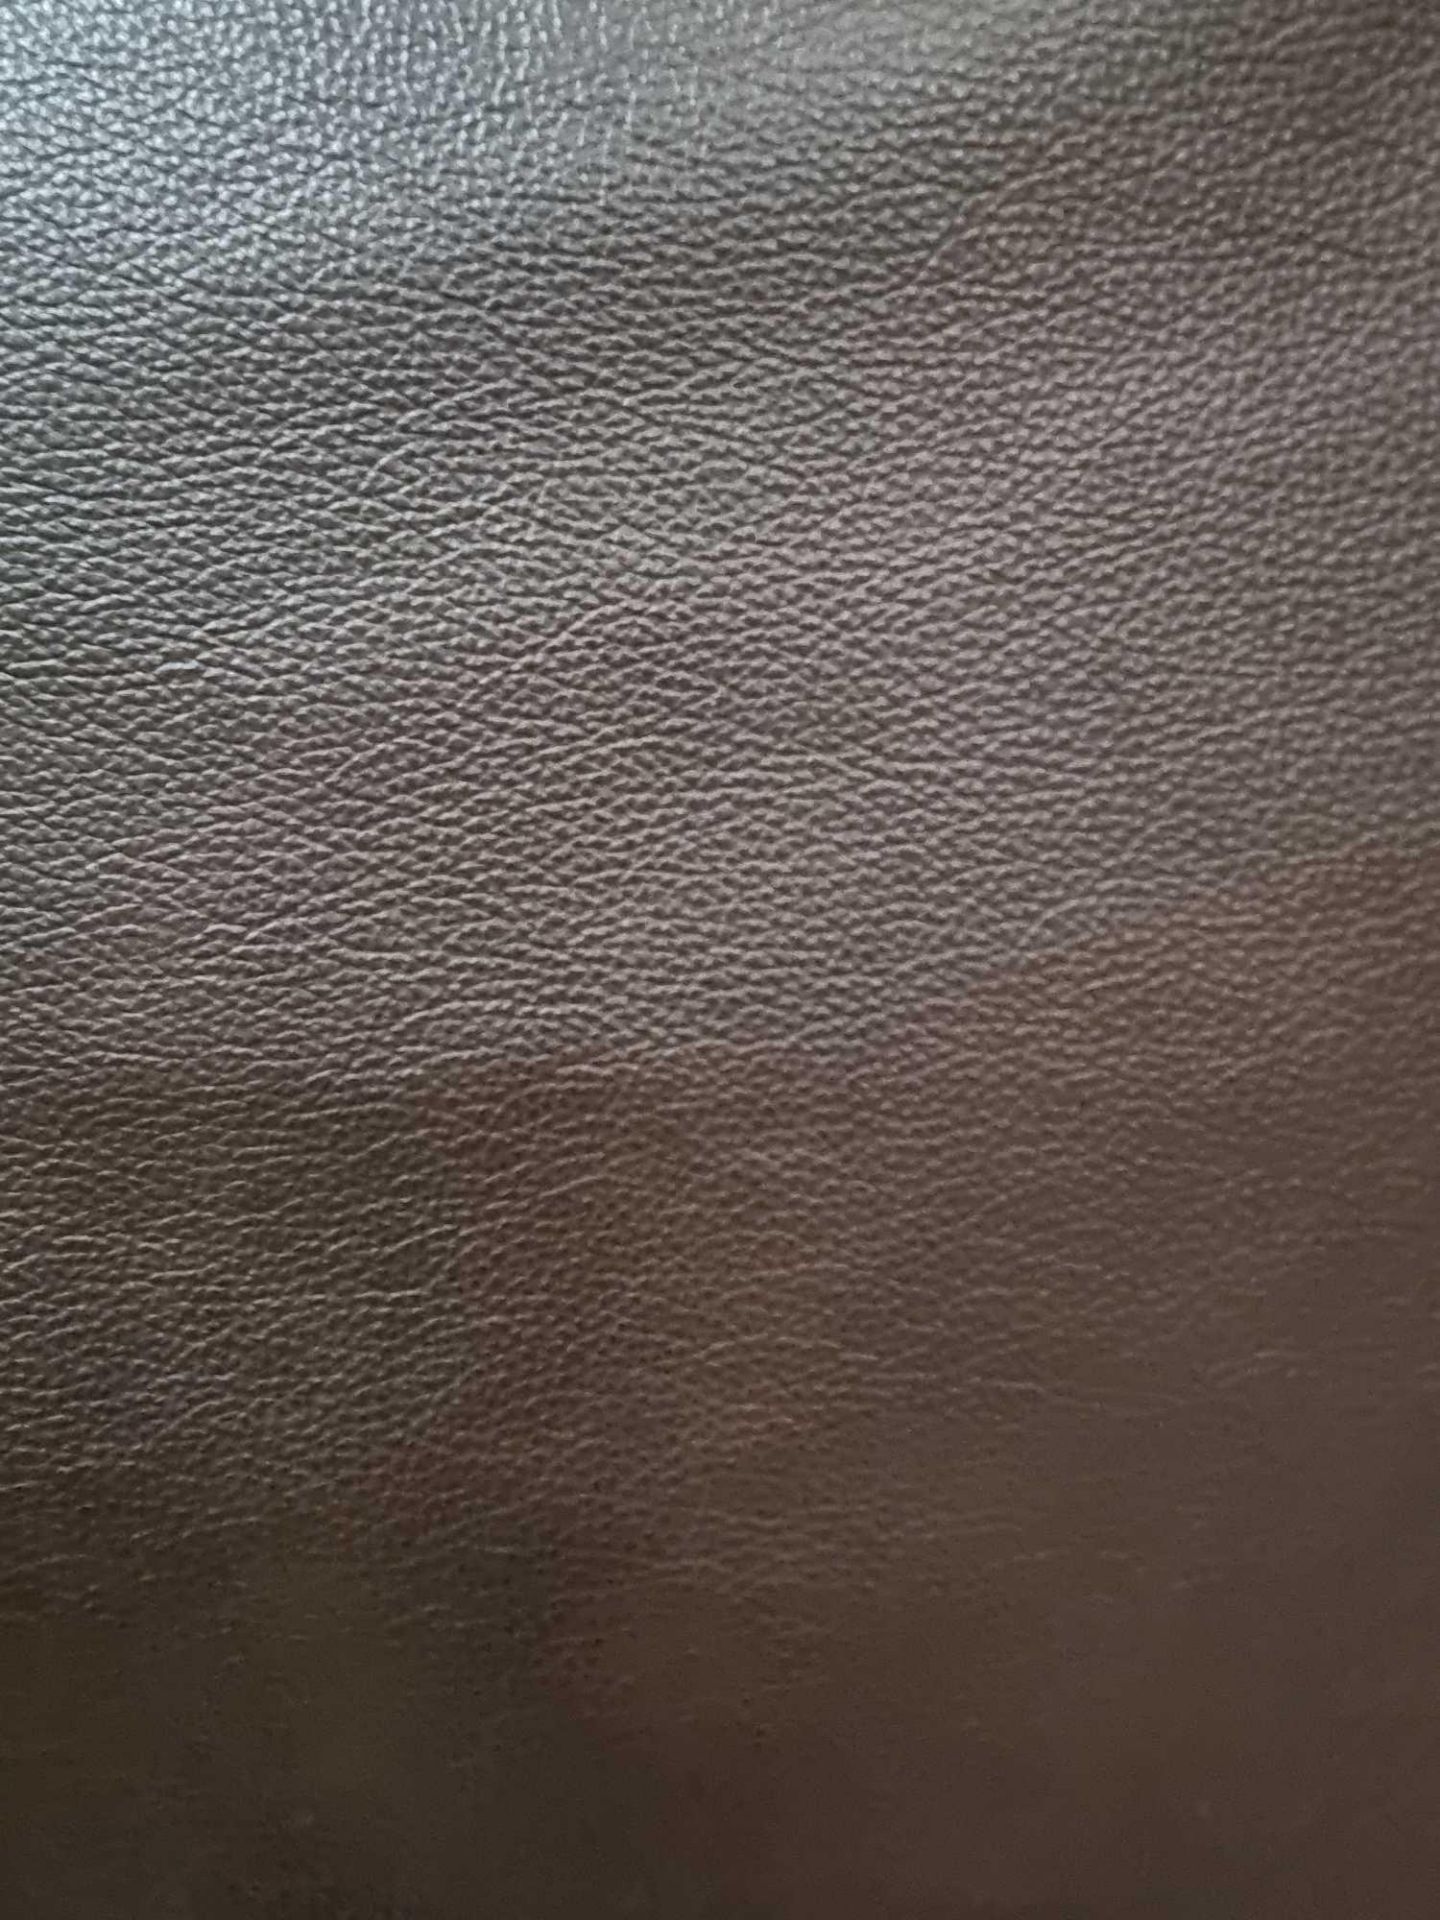 Chocolate Leather Hide approximately 4.2mÂ² 2.1 x 2cm ( Hide No,135)